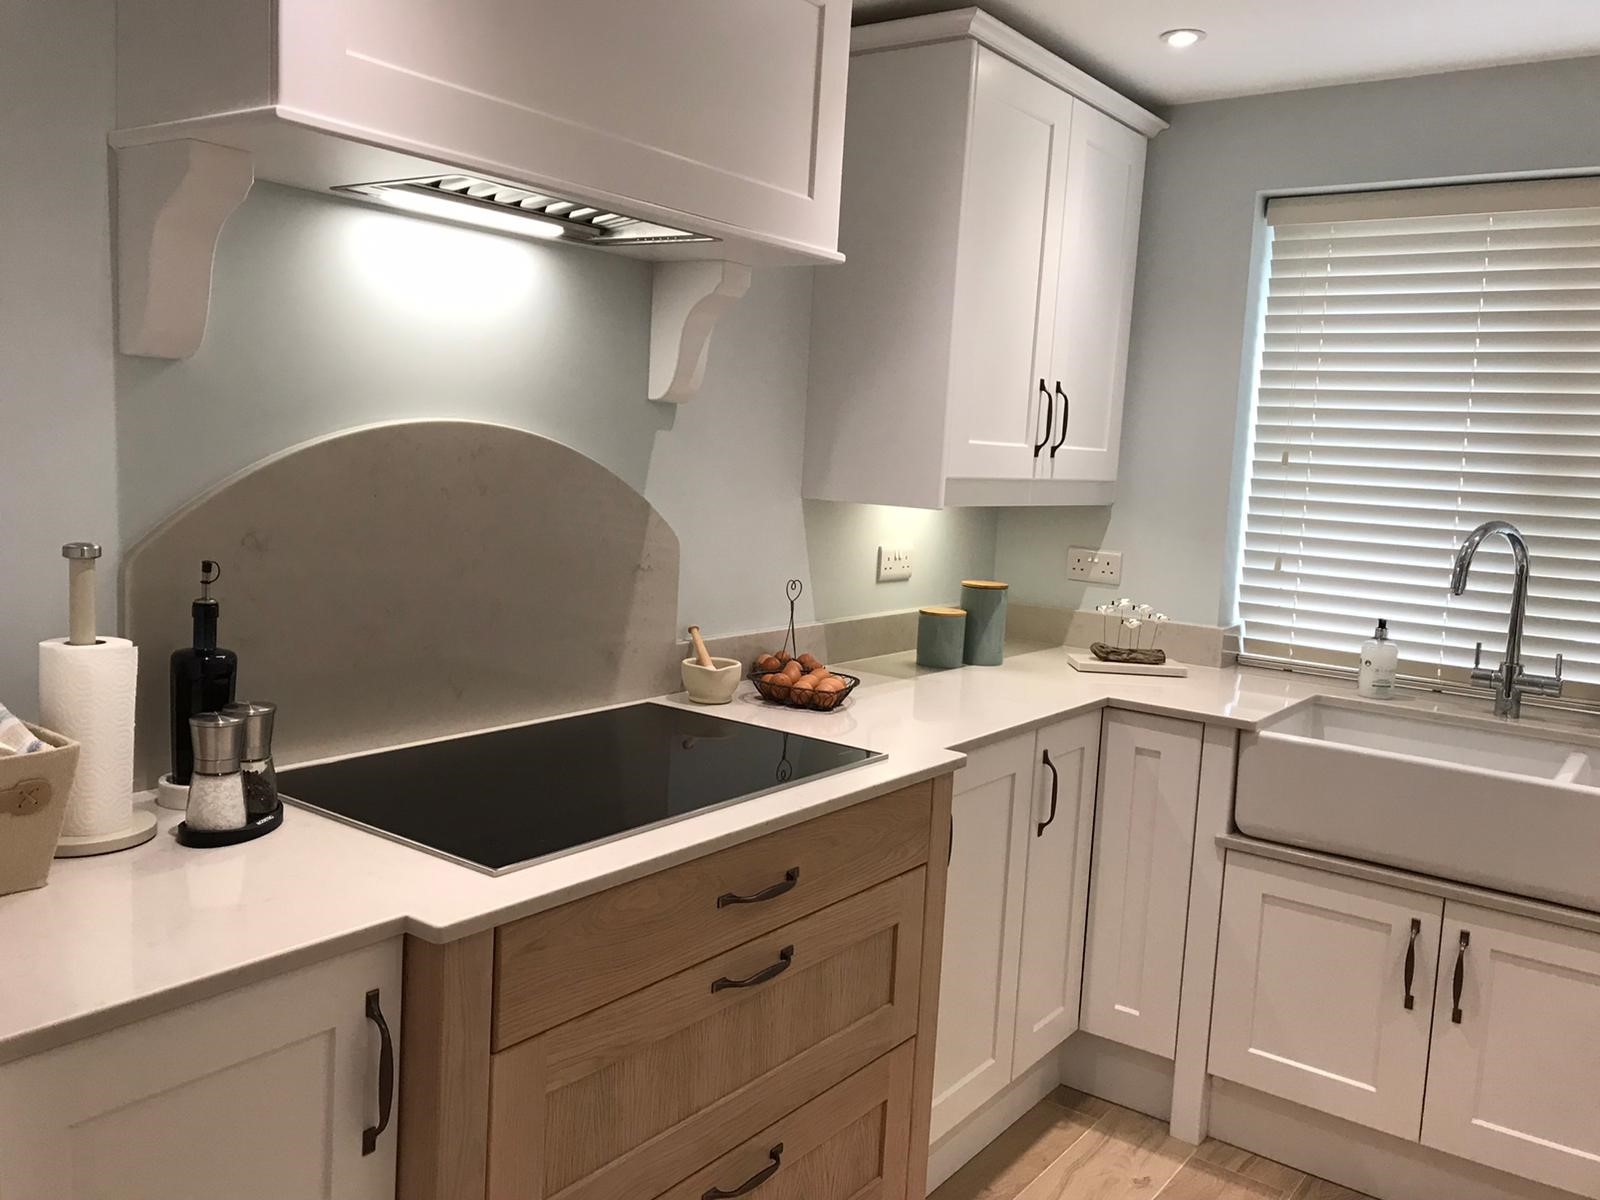 Bespoke kitchen with breakfront drawers